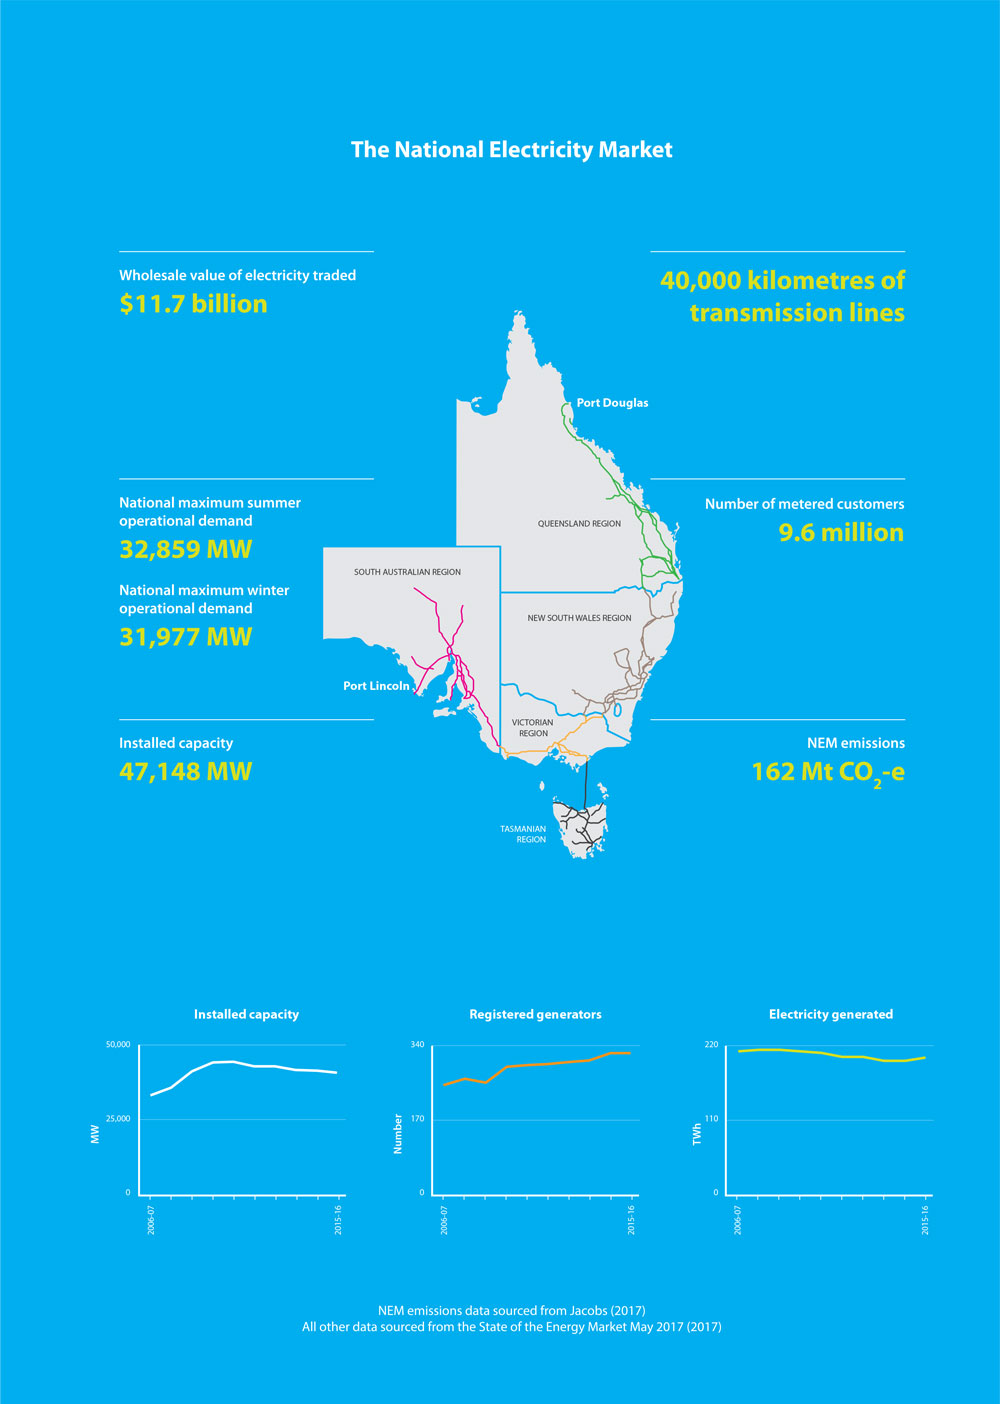 this graphic shows a map of the major transmission lines that transport electricity, starting in port douglas in northern queensland, and ending in port lincoln in south australia. the graphic also shows some statistics for the national electricity market: • wholesale value of electricity traded: $11.7 billion • national maximum summer operational demand: 32,859 megawatts • national maximum winter operational demand: 31,977 megawatts • installed capacity: 47,148 megawatts • 40,000 kilometres of transmission lines • number of metered customers: 9.6 million • nem emissions: 162 million tonnes of carbon dioxide equivalent there are also three graphs, showing: • an increase in installed capacity from fy2007 to fy2011, then a slight, gradual decrease to fy2016. • the number of registered generators has increased from fy2007 to fy2016. • the amount of electricity generated has slightly decreased from fy2007 to fy2015, but with a slight upturn from fy2015 to fy2016. 